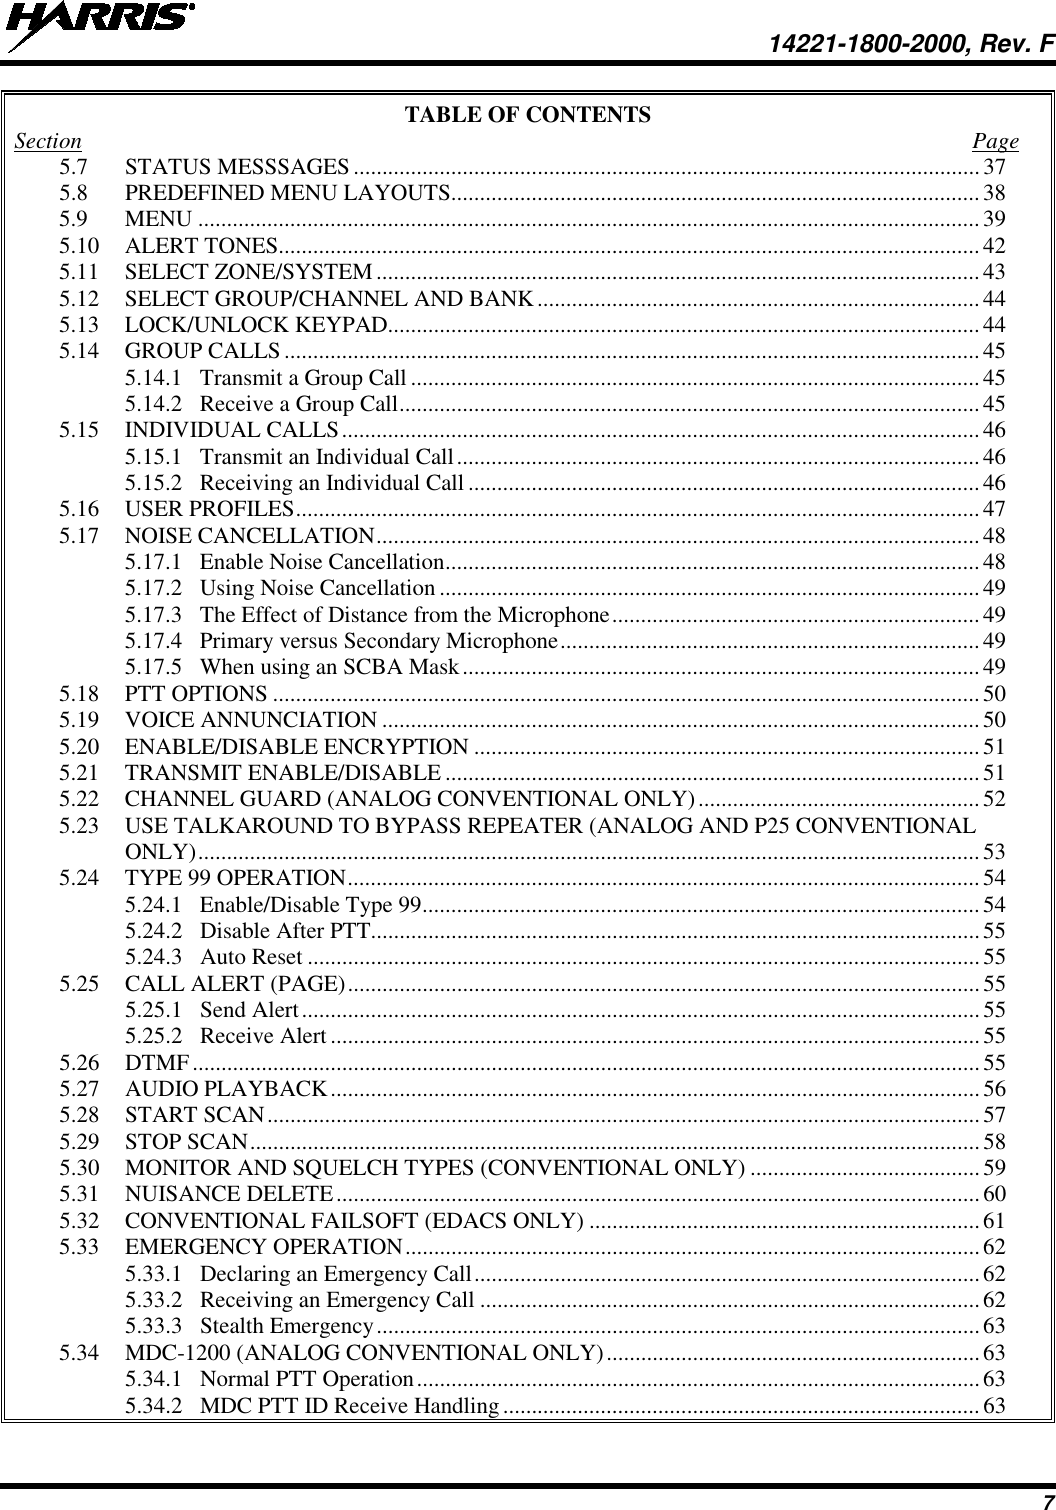  14221-1800-2000, Rev. F 7 TABLE OF CONTENTS Section  Page 5.7 STATUS MESSSAGES ............................................................................................................. 37 5.8 PREDEFINED MENU LAYOUTS............................................................................................ 38 5.9 MENU ........................................................................................................................................ 39 5.10 ALERT TONES.......................................................................................................................... 42 5.11 SELECT ZONE/SYSTEM ......................................................................................................... 43 5.12 SELECT GROUP/CHANNEL AND BANK ............................................................................. 44 5.13 LOCK/UNLOCK KEYPAD....................................................................................................... 44 5.14 GROUP CALLS ......................................................................................................................... 45 5.14.1 Transmit a Group Call ................................................................................................... 45 5.14.2 Receive a Group Call ..................................................................................................... 45 5.15 INDIVIDUAL CALLS ............................................................................................................... 46 5.15.1 Transmit an Individual Call ........................................................................................... 46 5.15.2 Receiving an Individual Call ......................................................................................... 46 5.16 USER PROFILES ....................................................................................................................... 47 5.17 NOISE CANCELLATION ......................................................................................................... 48 5.17.1 Enable Noise Cancellation ............................................................................................. 48 5.17.2 Using Noise Cancellation .............................................................................................. 49 5.17.3 The Effect of Distance from the Microphone ................................................................ 49 5.17.4 Primary versus Secondary Microphone ......................................................................... 49 5.17.5 When using an SCBA Mask .......................................................................................... 49 5.18 PTT OPTIONS ........................................................................................................................... 50 5.19 VOICE ANNUNCIATION ........................................................................................................ 50 5.20 ENABLE/DISABLE ENCRYPTION ........................................................................................ 51 5.21 TRANSMIT ENABLE/DISABLE ............................................................................................. 51 5.22 CHANNEL GUARD (ANALOG CONVENTIONAL ONLY) ................................................. 52 5.23 USE TALKAROUND TO BYPASS REPEATER (ANALOG AND P25 CONVENTIONAL ONLY) ........................................................................................................................................ 53 5.24 TYPE 99 OPERATION .............................................................................................................. 54 5.24.1 Enable/Disable Type 99 ................................................................................................. 54 5.24.2 Disable After PTT.......................................................................................................... 55 5.24.3 Auto Reset ..................................................................................................................... 55 5.25 CALL ALERT (PAGE) .............................................................................................................. 55 5.25.1 Send Alert ...................................................................................................................... 55 5.25.2 Receive Alert ................................................................................................................. 55 5.26 DTMF ......................................................................................................................................... 55 5.27 AUDIO PLAYBACK ................................................................................................................. 56 5.28 START SCAN ............................................................................................................................ 57 5.29 STOP SCAN ............................................................................................................................... 58 5.30 MONITOR AND SQUELCH TYPES (CONVENTIONAL ONLY) ........................................ 59 5.31 NUISANCE DELETE ................................................................................................................ 60 5.32 CONVENTIONAL FAILSOFT (EDACS ONLY) .................................................................... 61 5.33 EMERGENCY OPERATION .................................................................................................... 62 5.33.1 Declaring an Emergency Call ........................................................................................ 62 5.33.2 Receiving an Emergency Call ....................................................................................... 62 5.33.3 Stealth Emergency ......................................................................................................... 63 5.34 MDC-1200 (ANALOG CONVENTIONAL ONLY) ................................................................. 63 5.34.1 Normal PTT Operation .................................................................................................. 63 5.34.2 MDC PTT ID Receive Handling ................................................................................... 63 